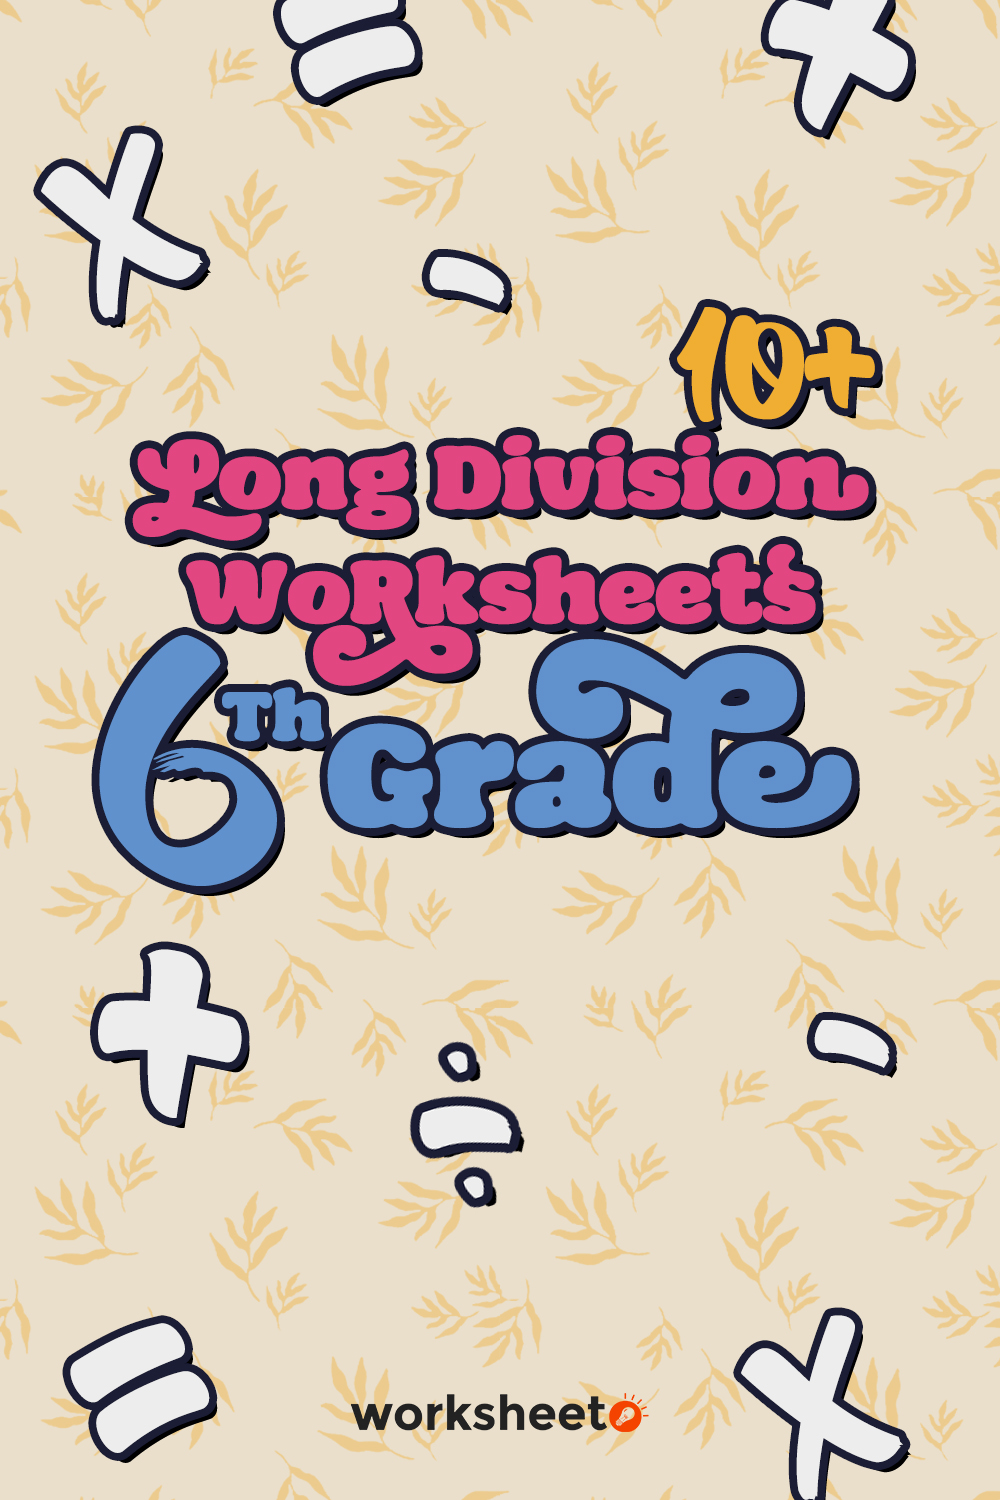 14 Images of Long Division Worksheets 6th Grade